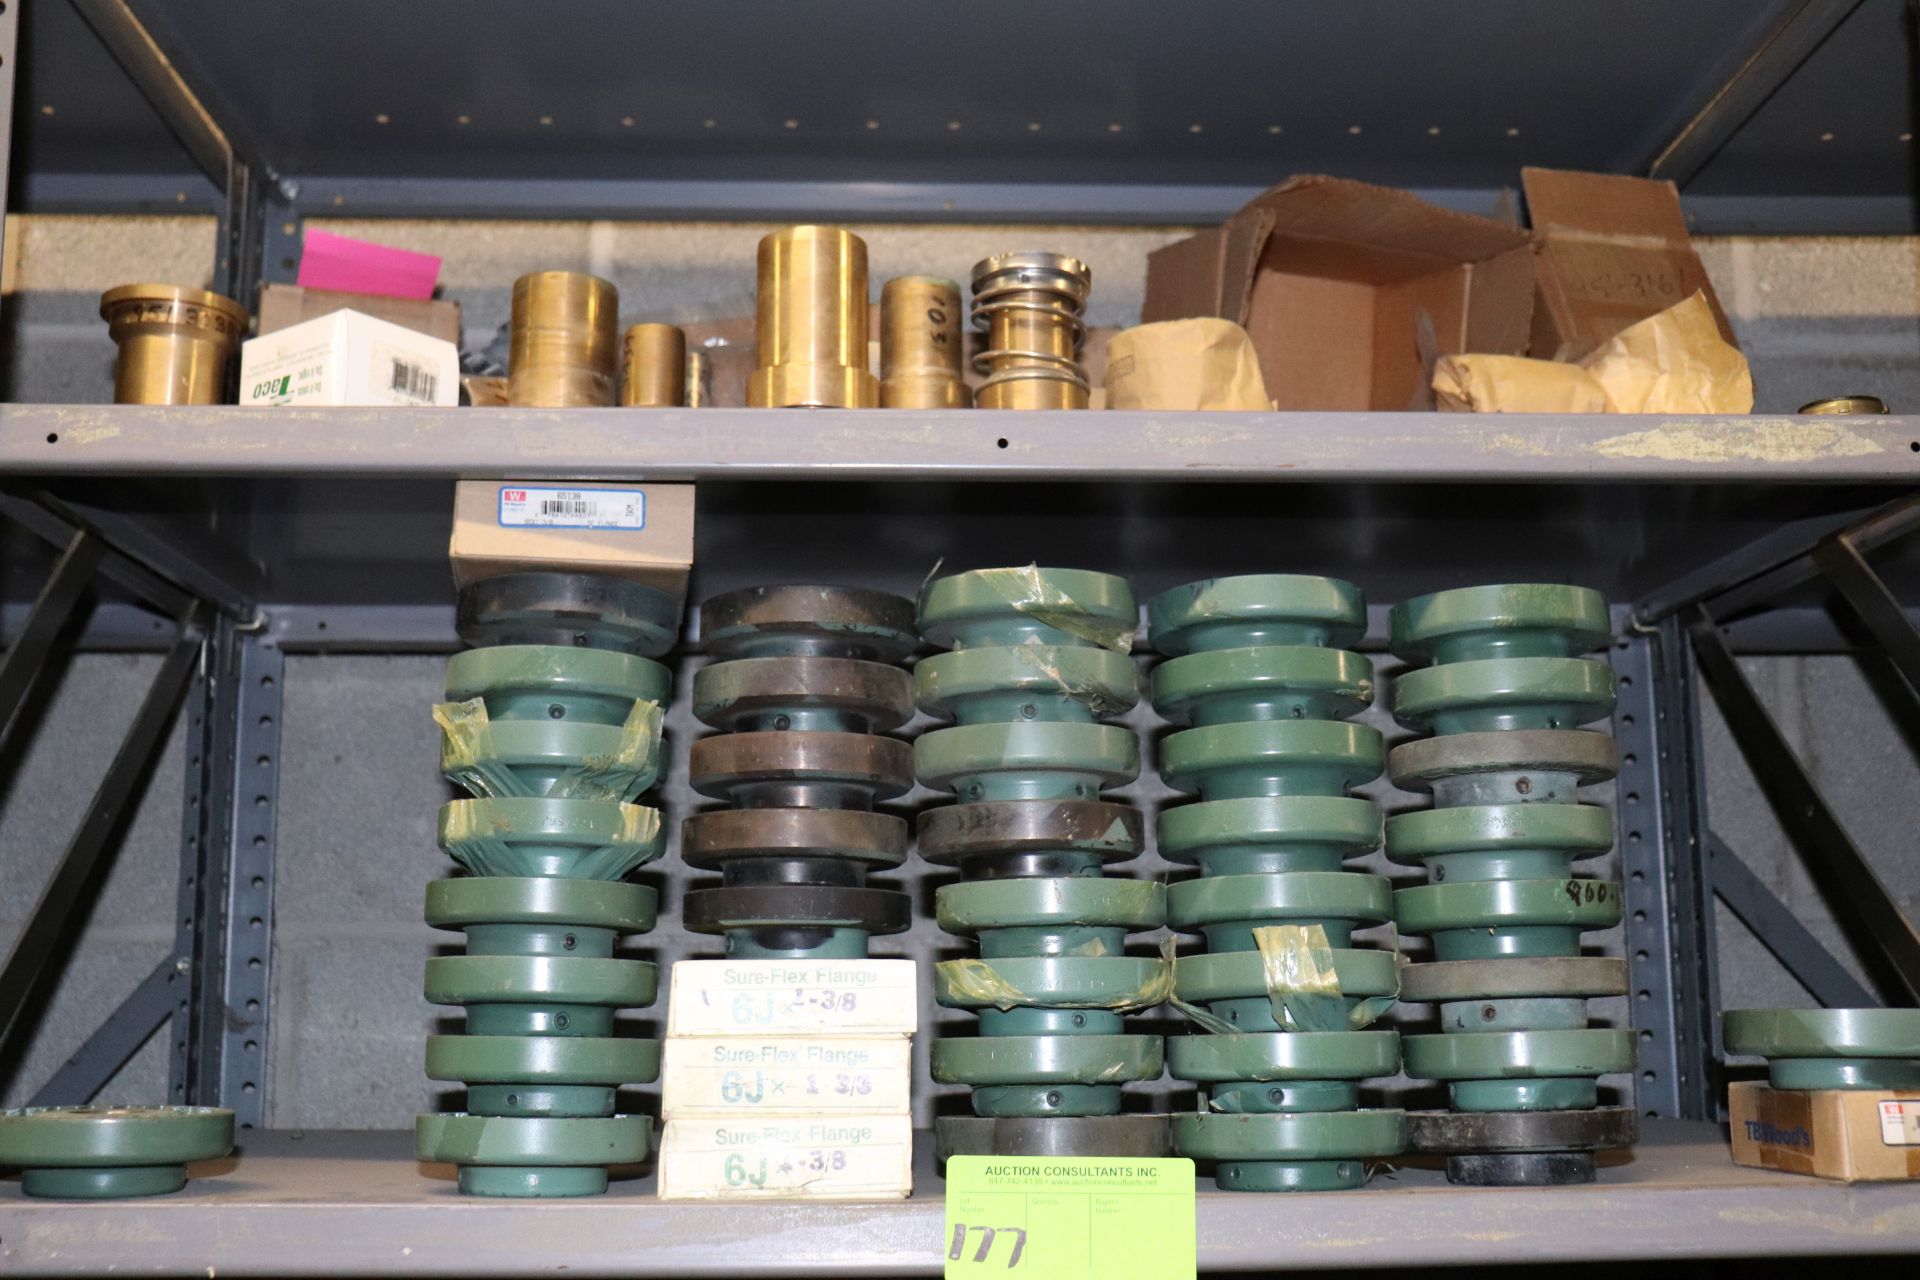 Shelf of flanges and copper fittings